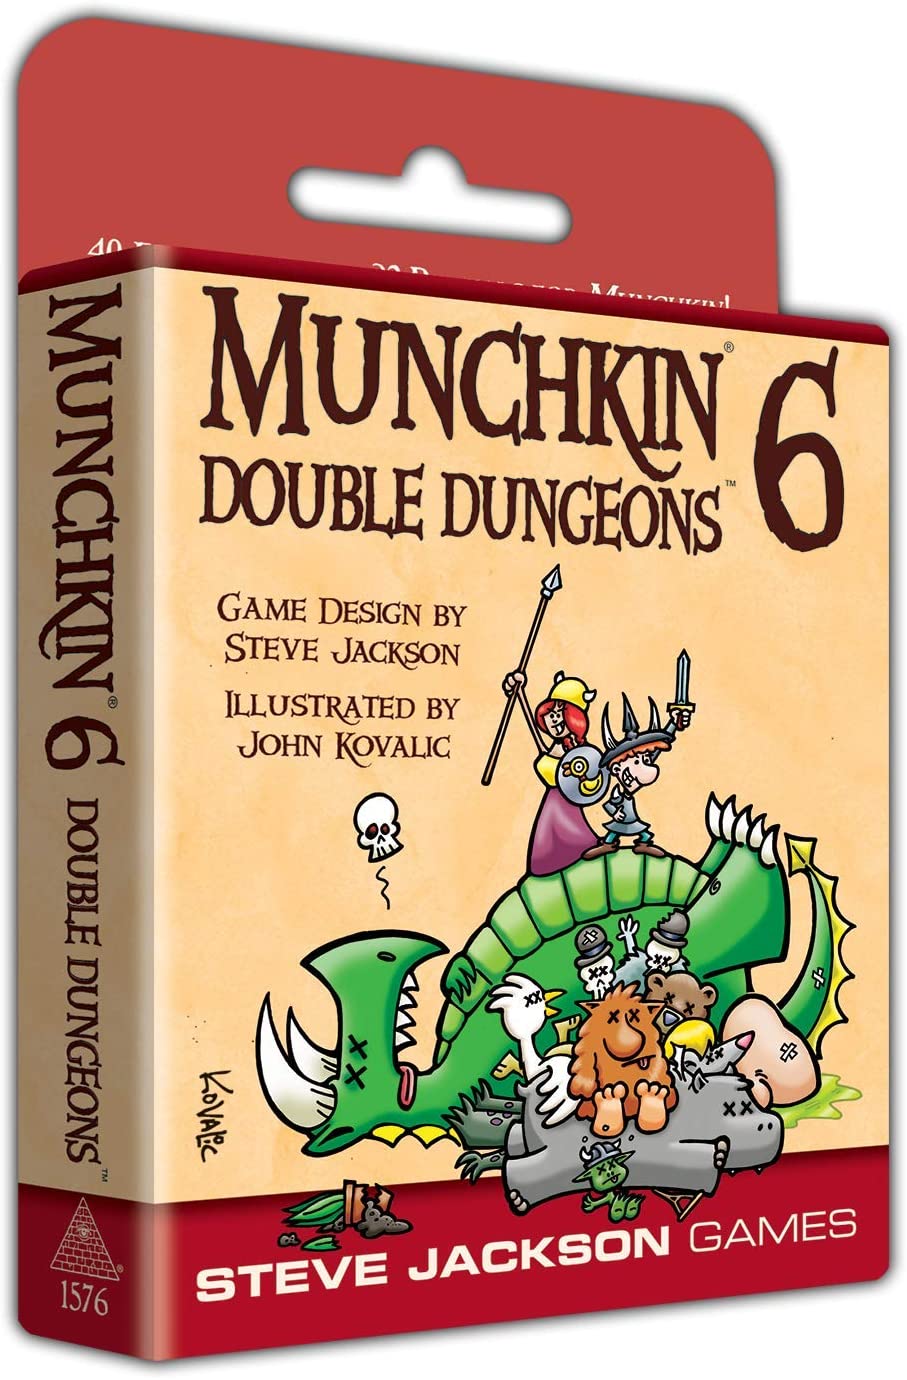 Munchkin - #6: Double Dungeons (Expanded Edition)